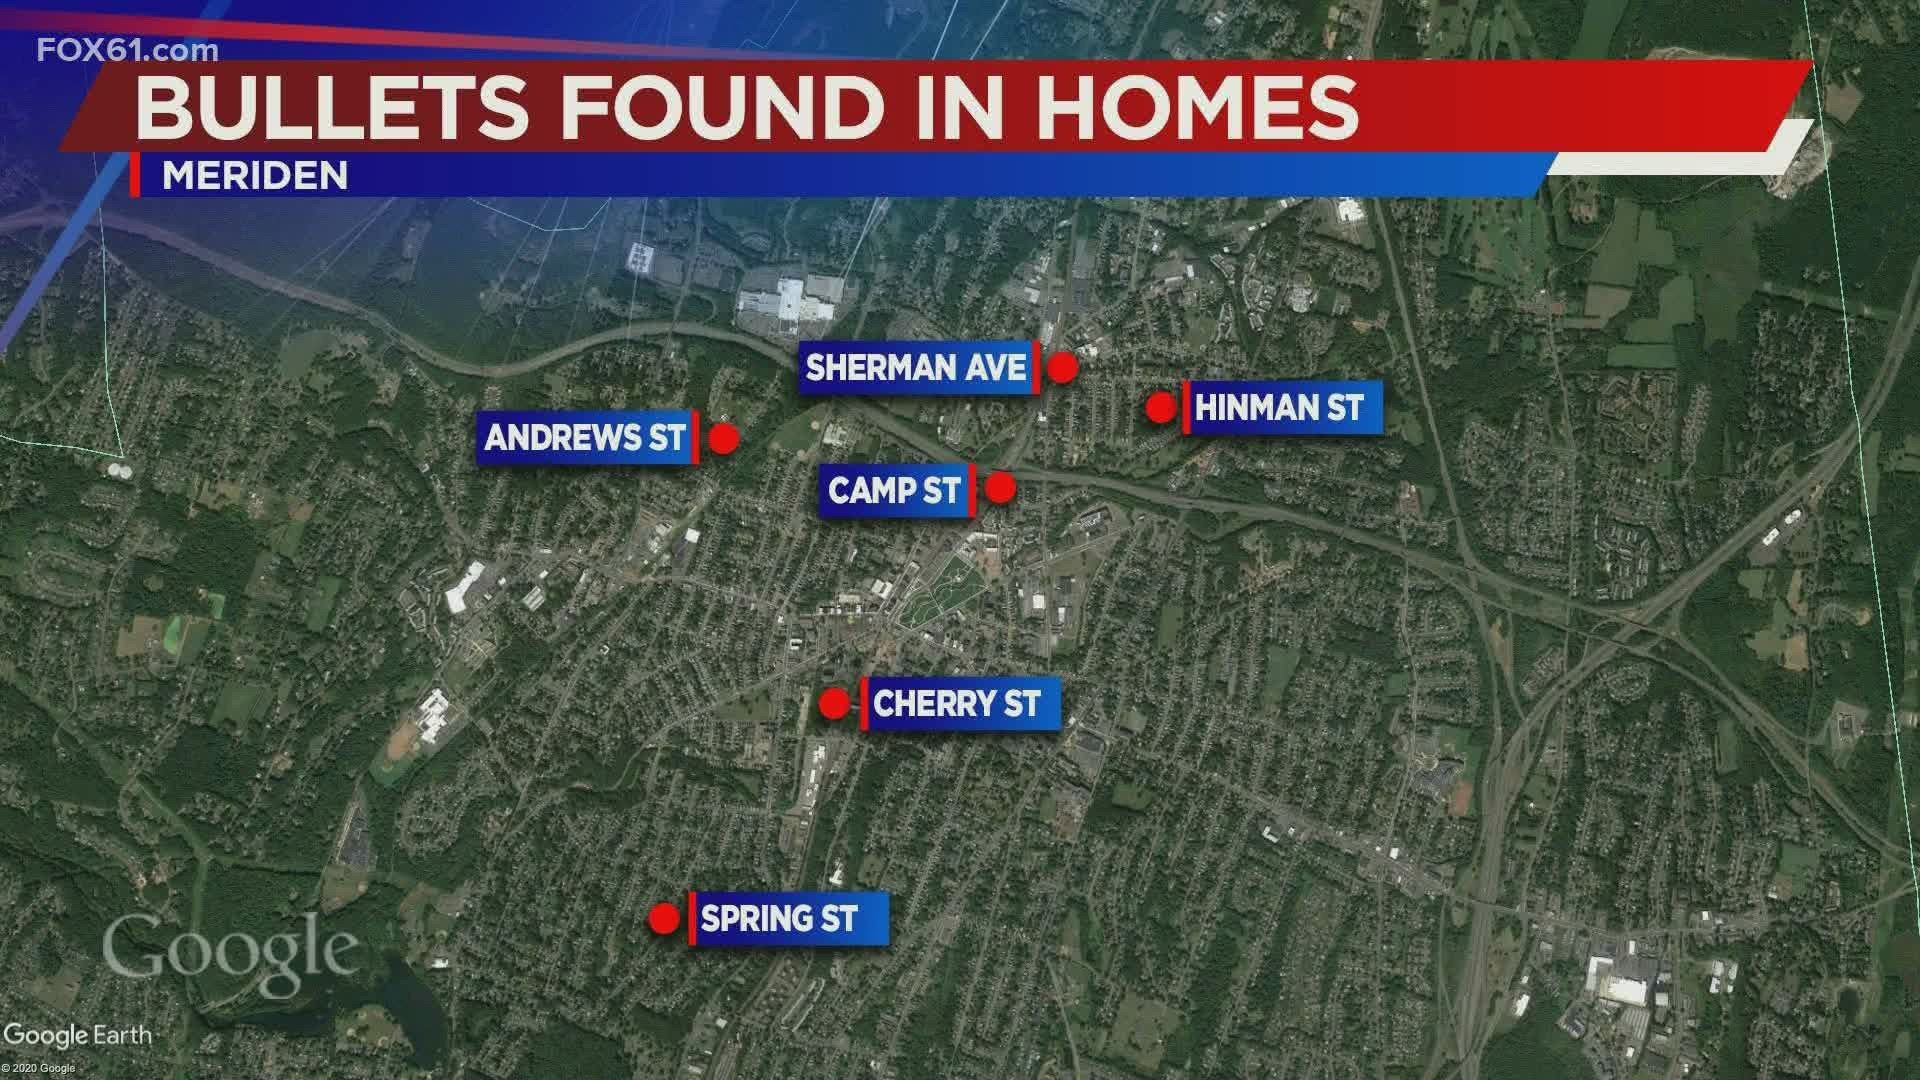 The shootings happened in the area of Camp Street, Hinman Street, Andrews Street, Spring Street, Sherman Avenue, and Cherry Street.